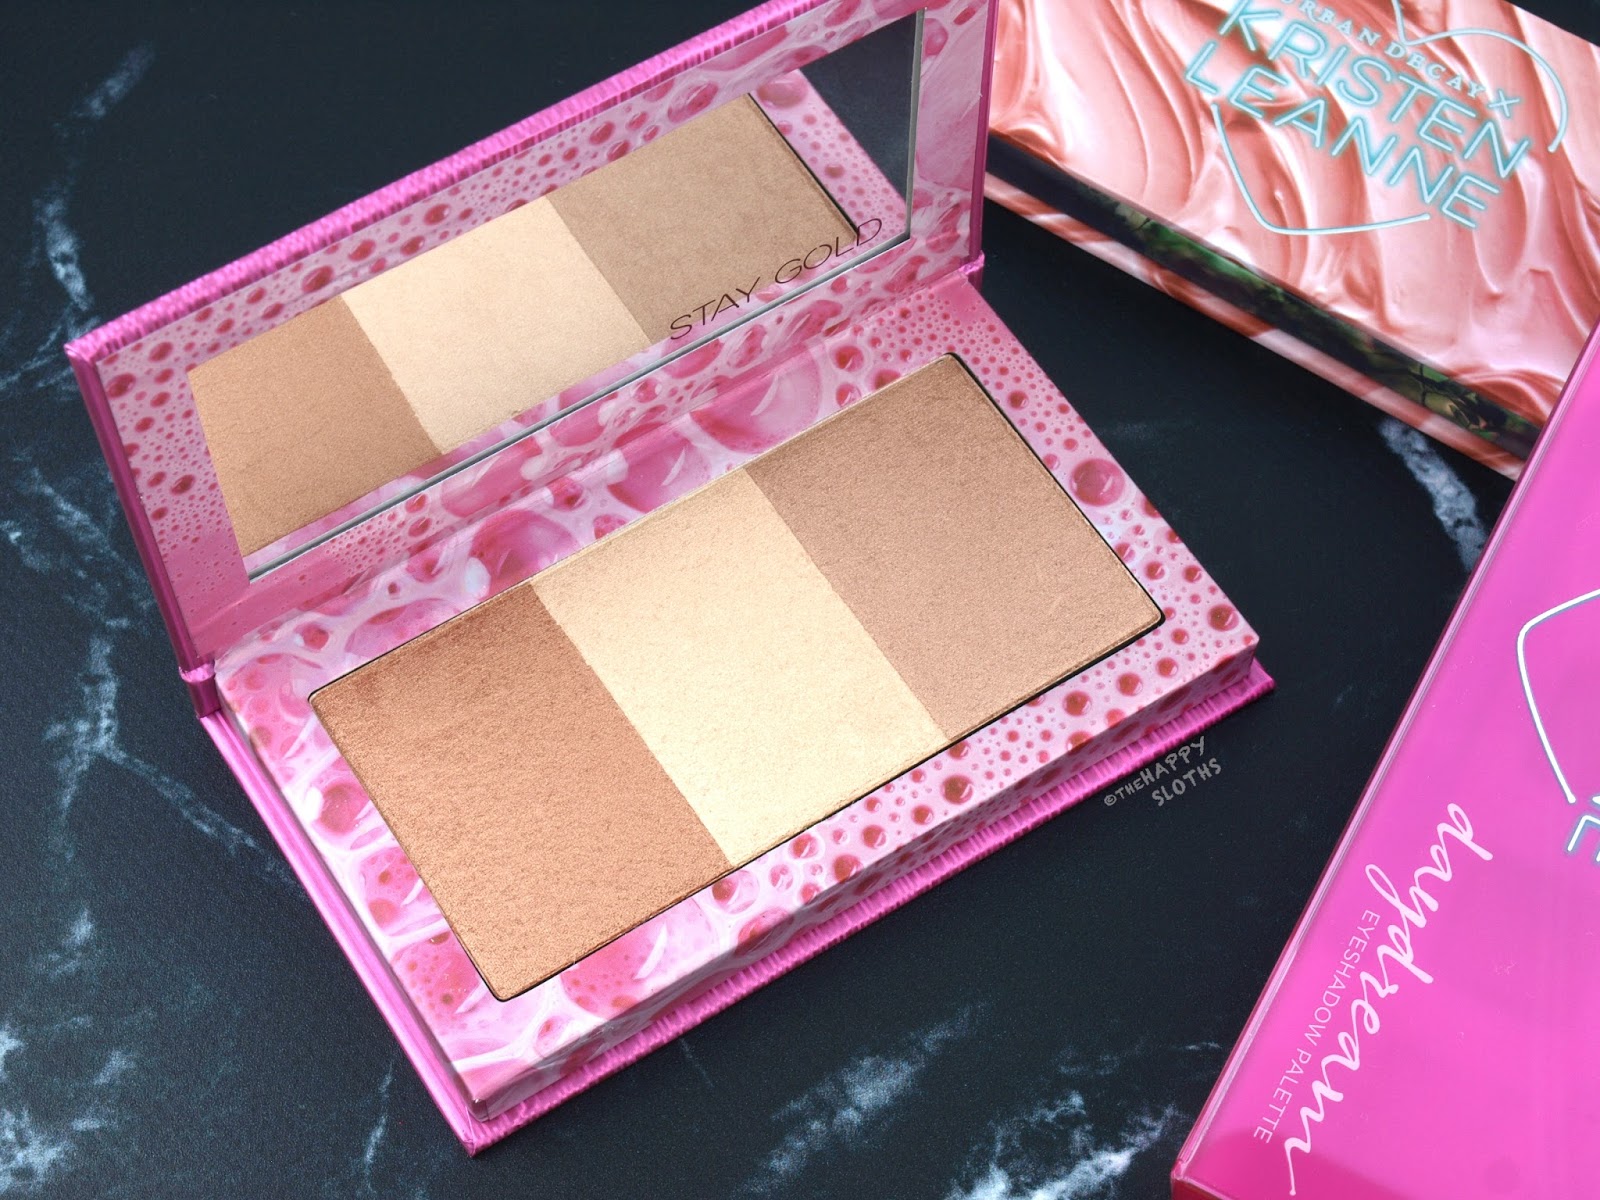 Urban Decay x Kristen Leanne Beauty Beam Highlight Palette: Review and Swatches